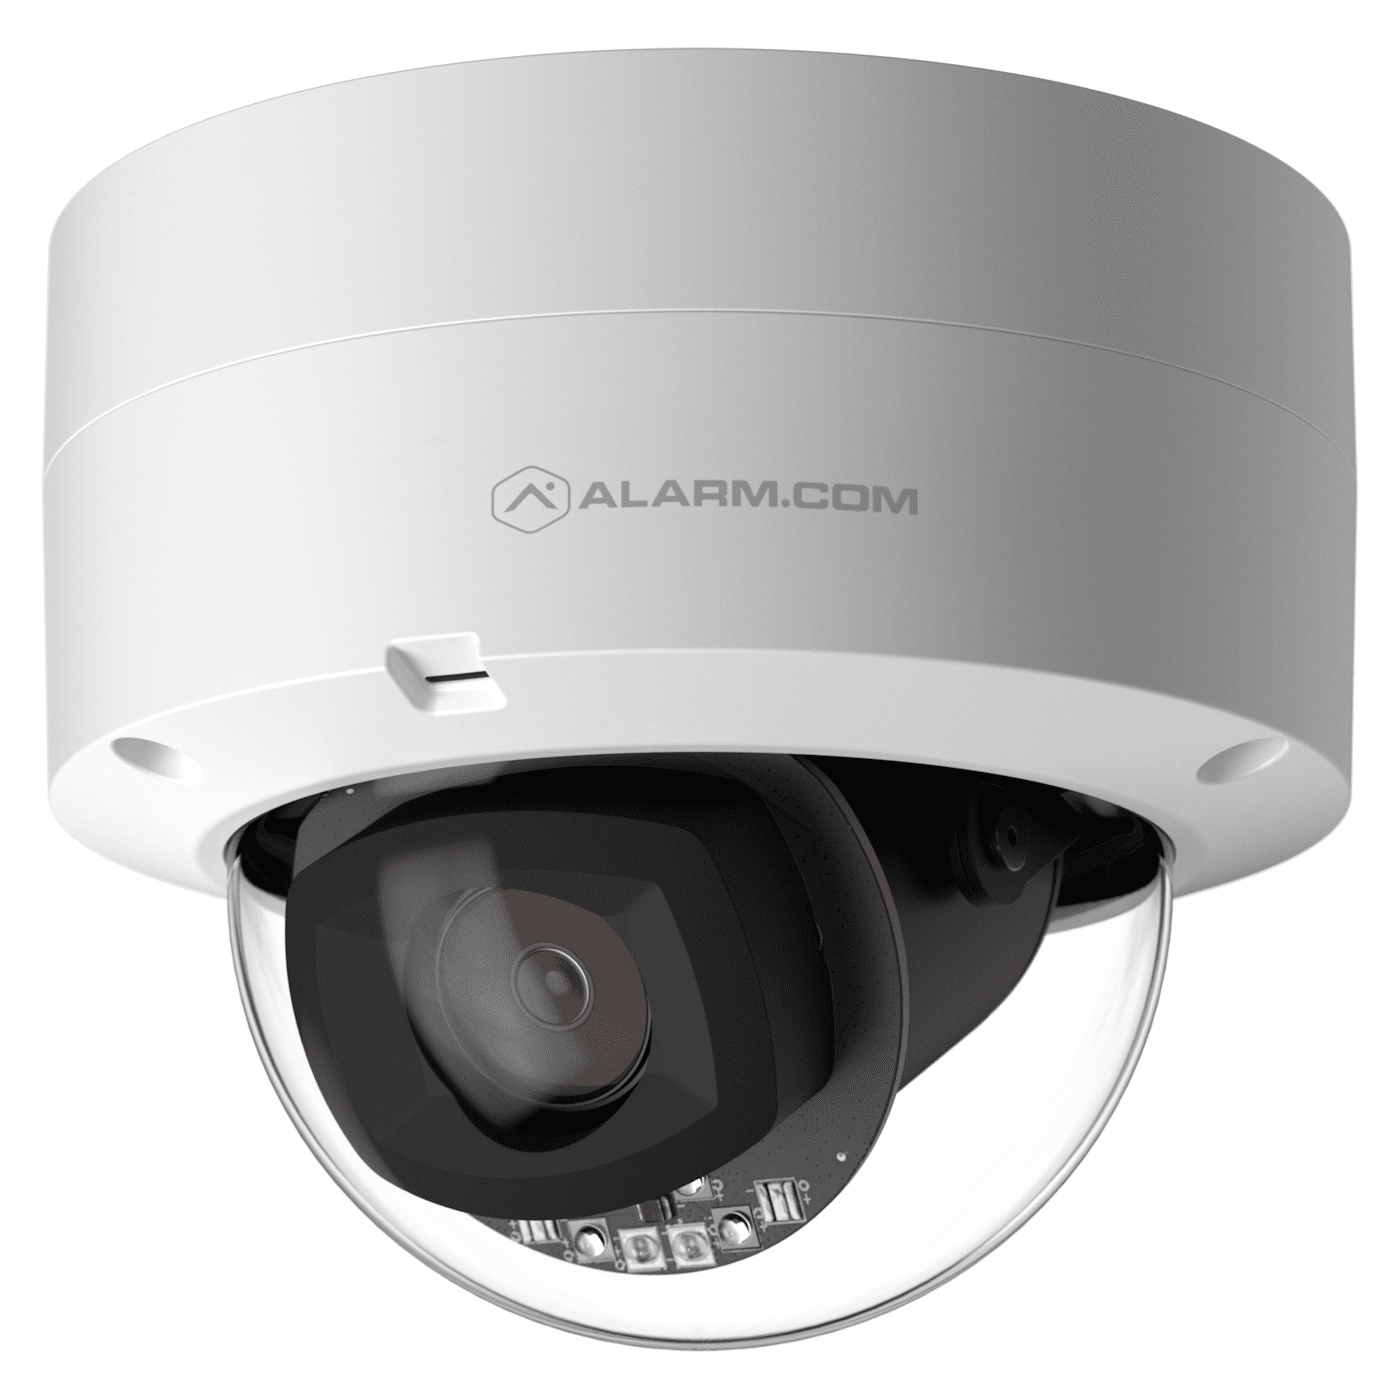 Alarm.com Pro Series Indoor/Outdoor Varifocal Lens 2MP Dome PoE Security Camera ADC-VC847PF